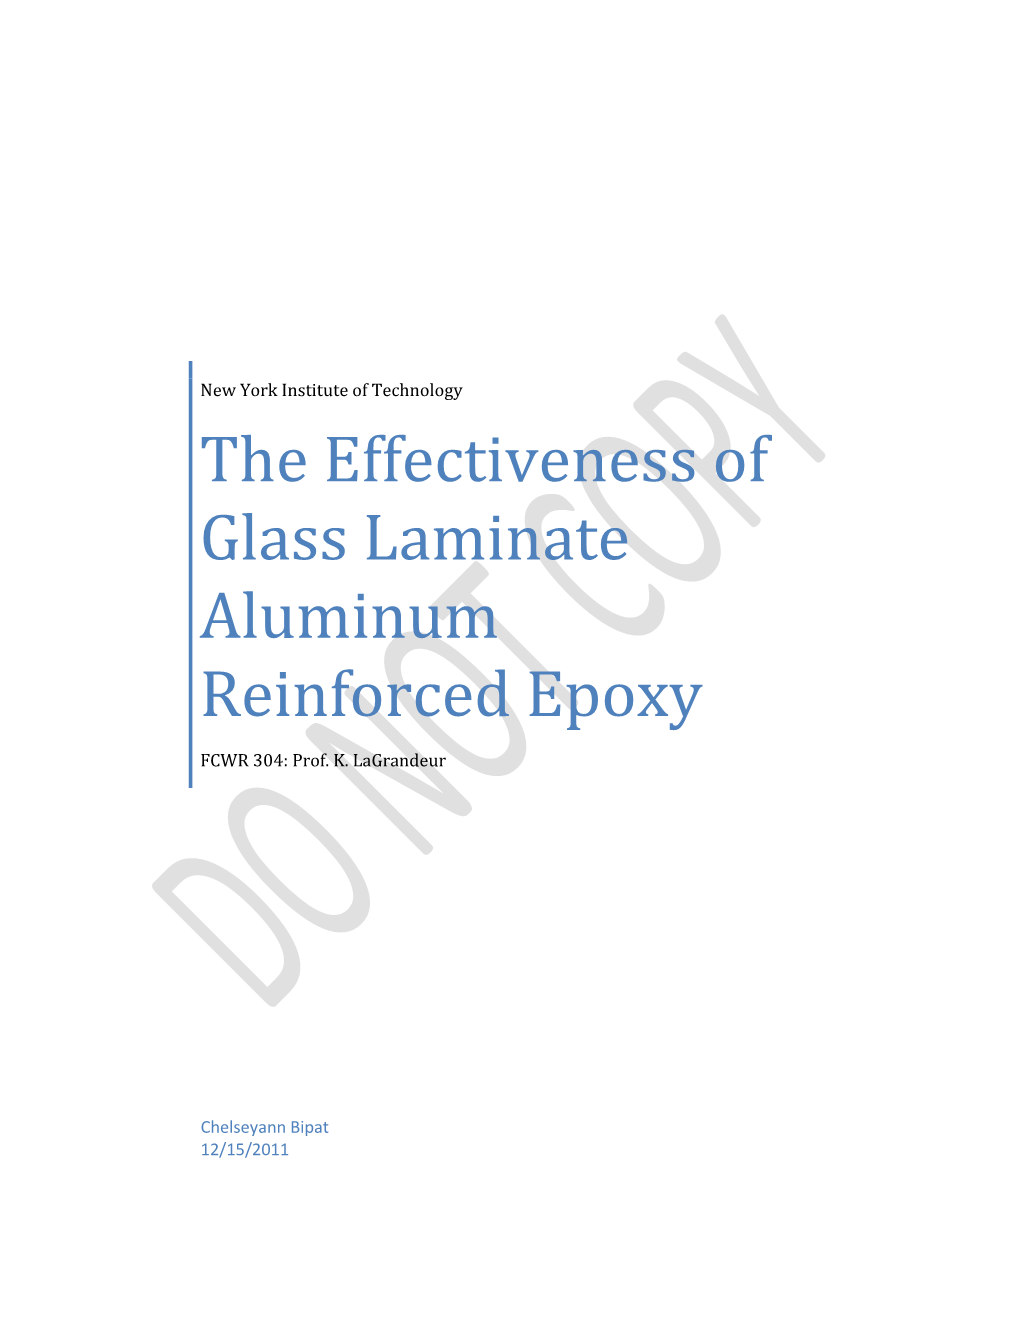 The Effectiveness of Glass Laminate Aluminum Reinforced Epoxy